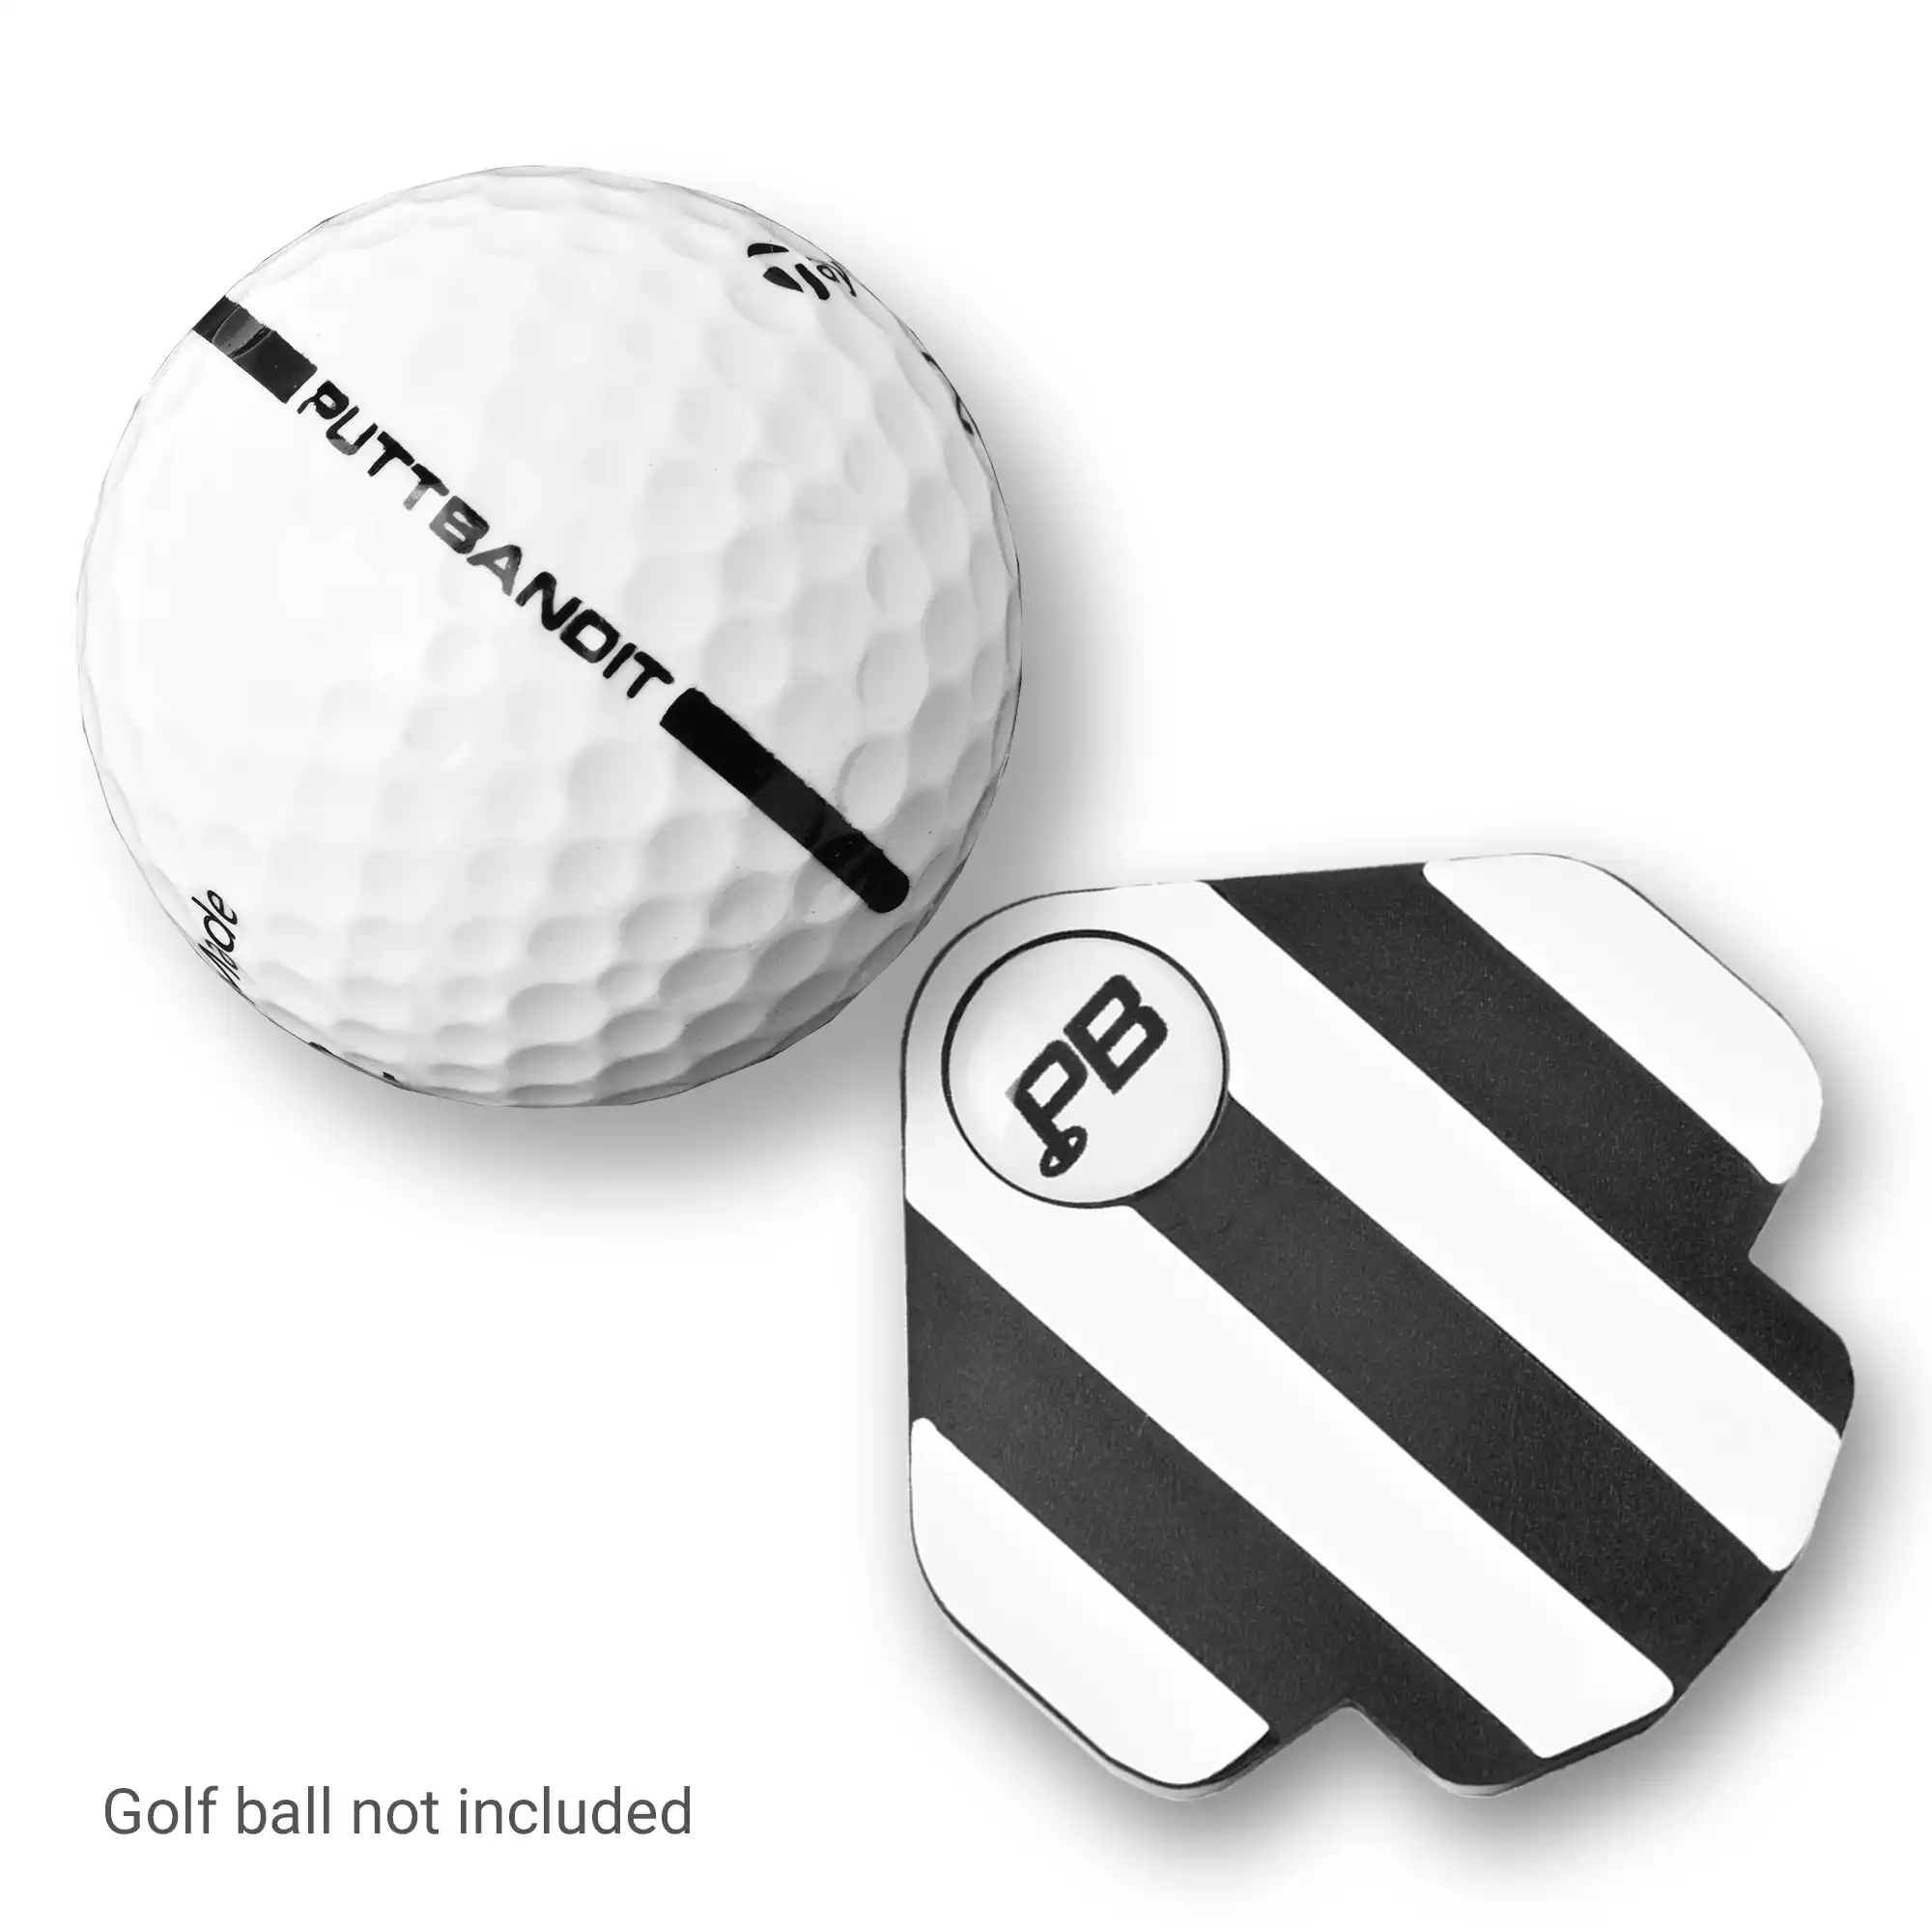 Puttbandit Classic black golf ball marker top view with golf ball, not included text